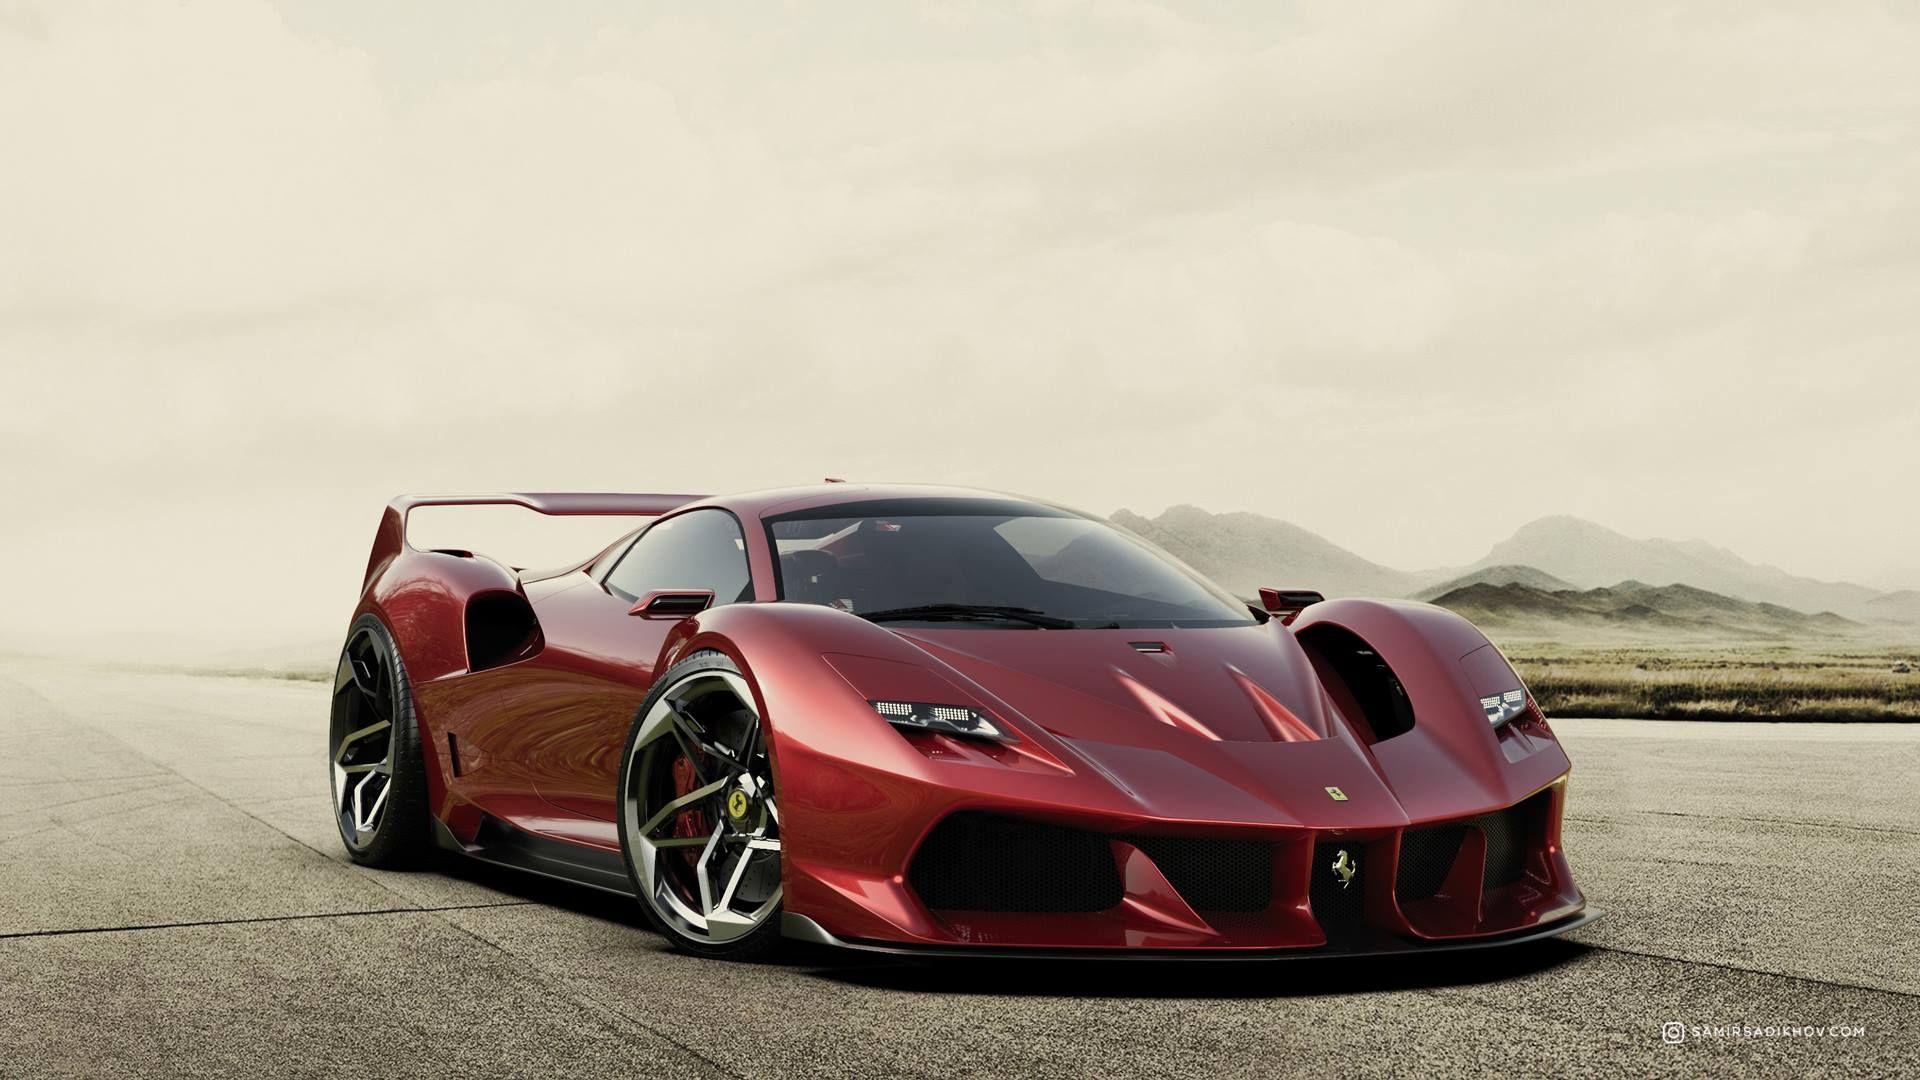 Ferrari Could Be Preparing to Reveal Its One-Off, F40-Inspired Supercar